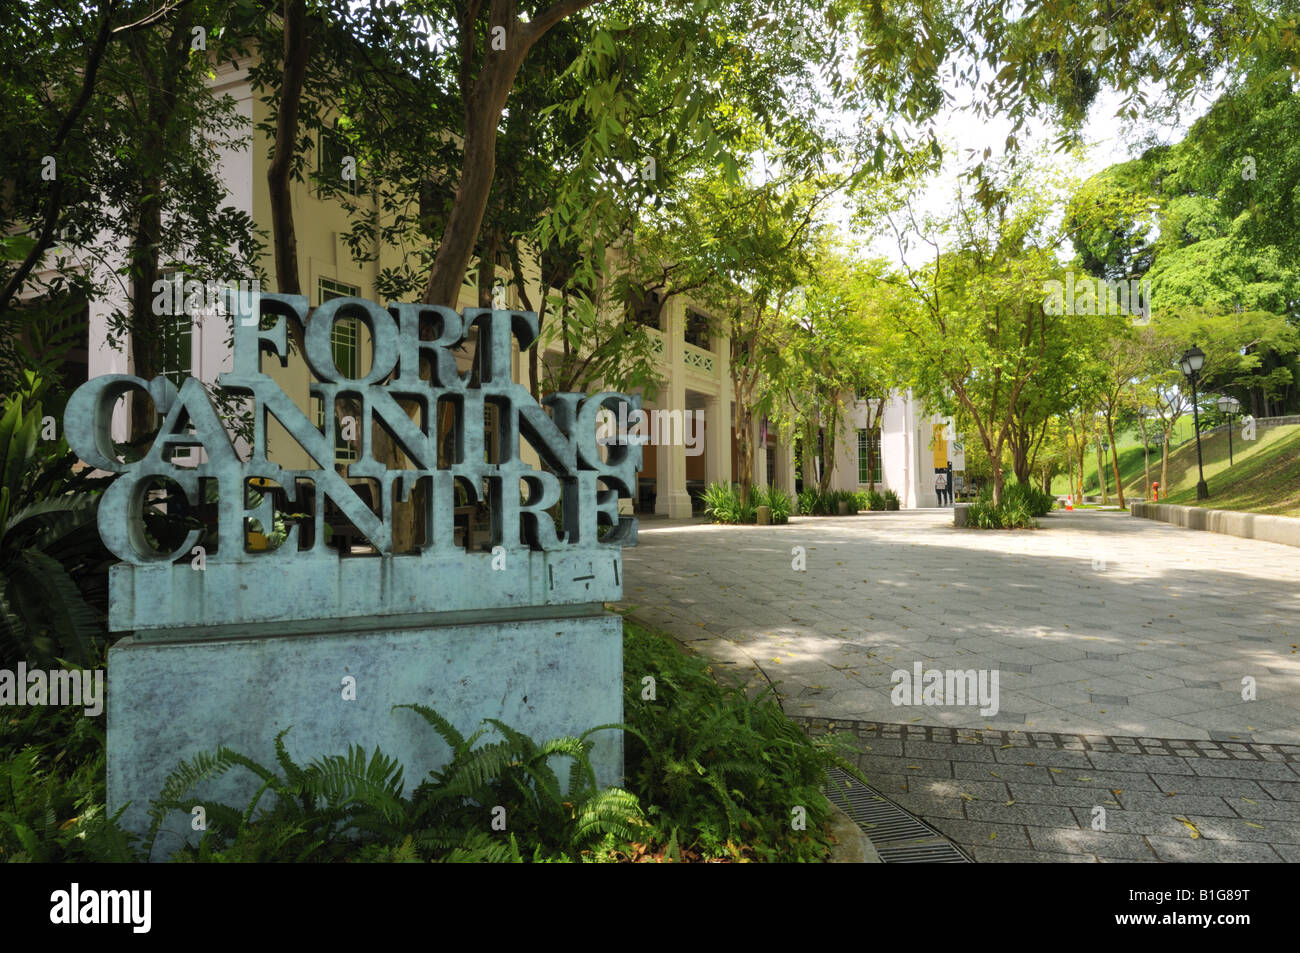 Fort Canning Centre Singapore Stock Photo